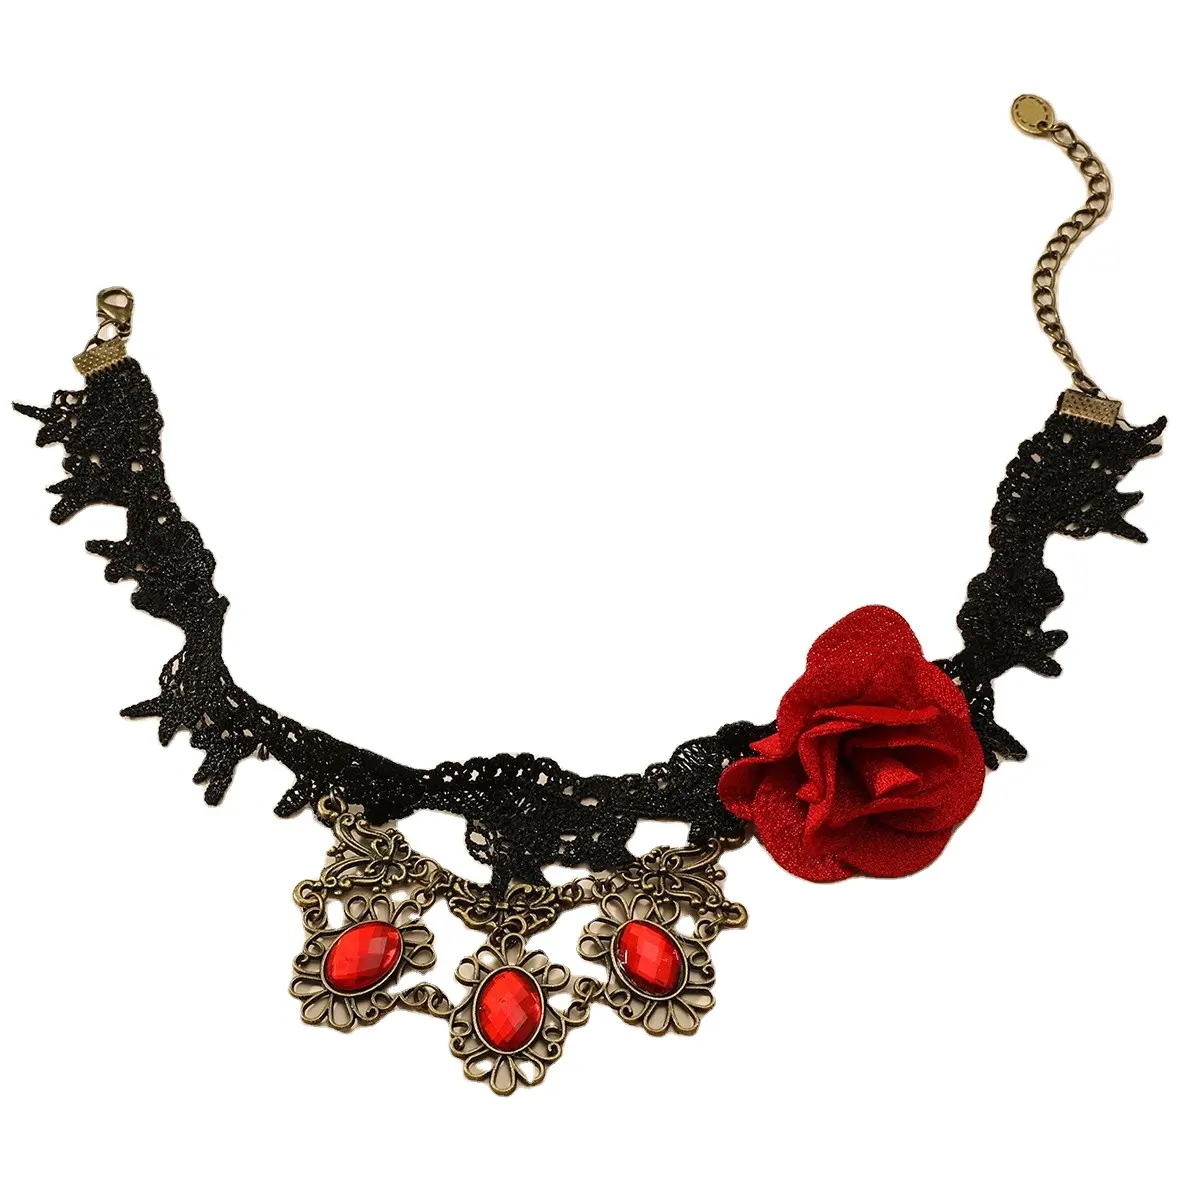 HOT Gothic style vintage lace sugoth necklace women's choker clothes accessories fashion short flower necklace clavicle chain